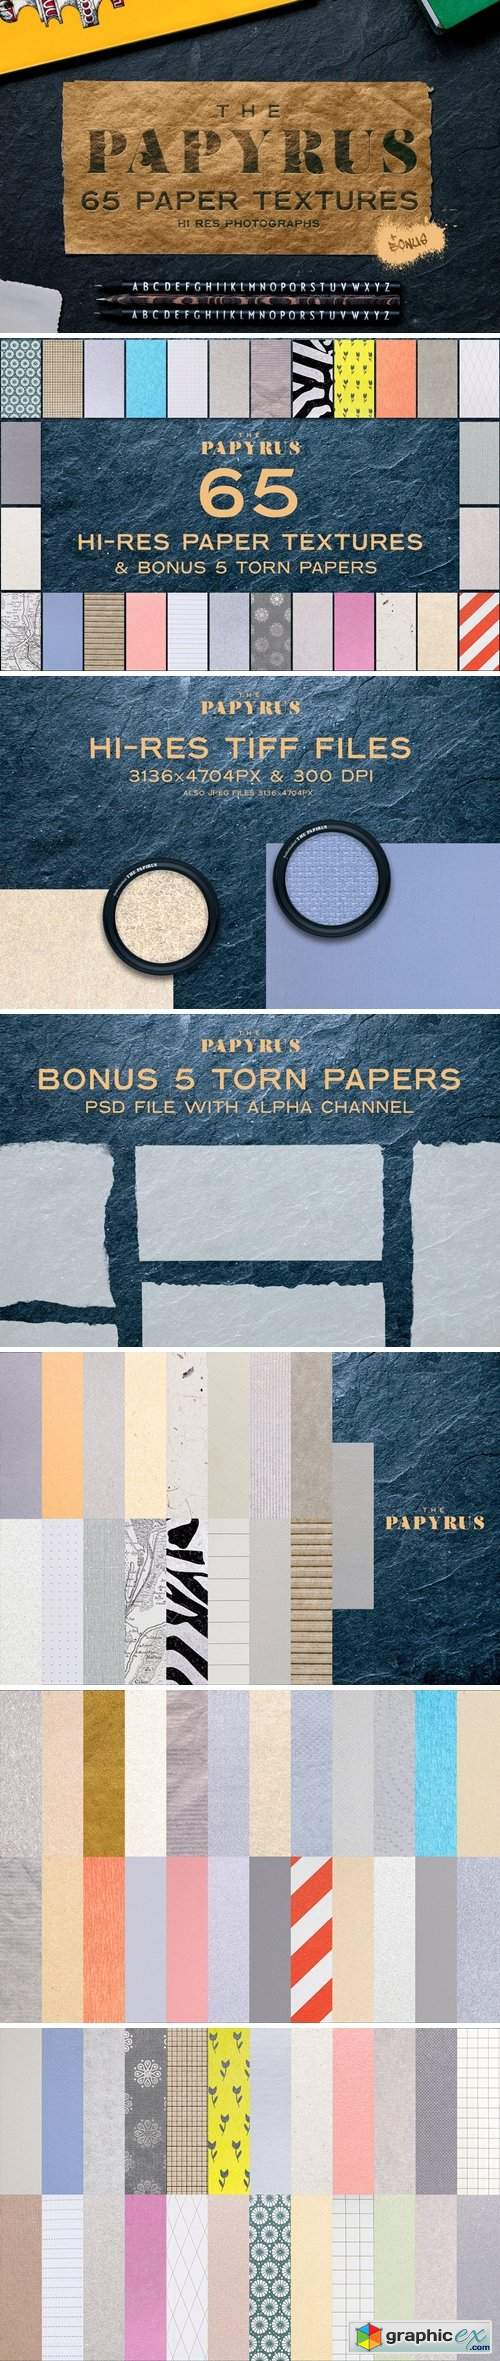 The Papyrus - 65 Paper Textures 